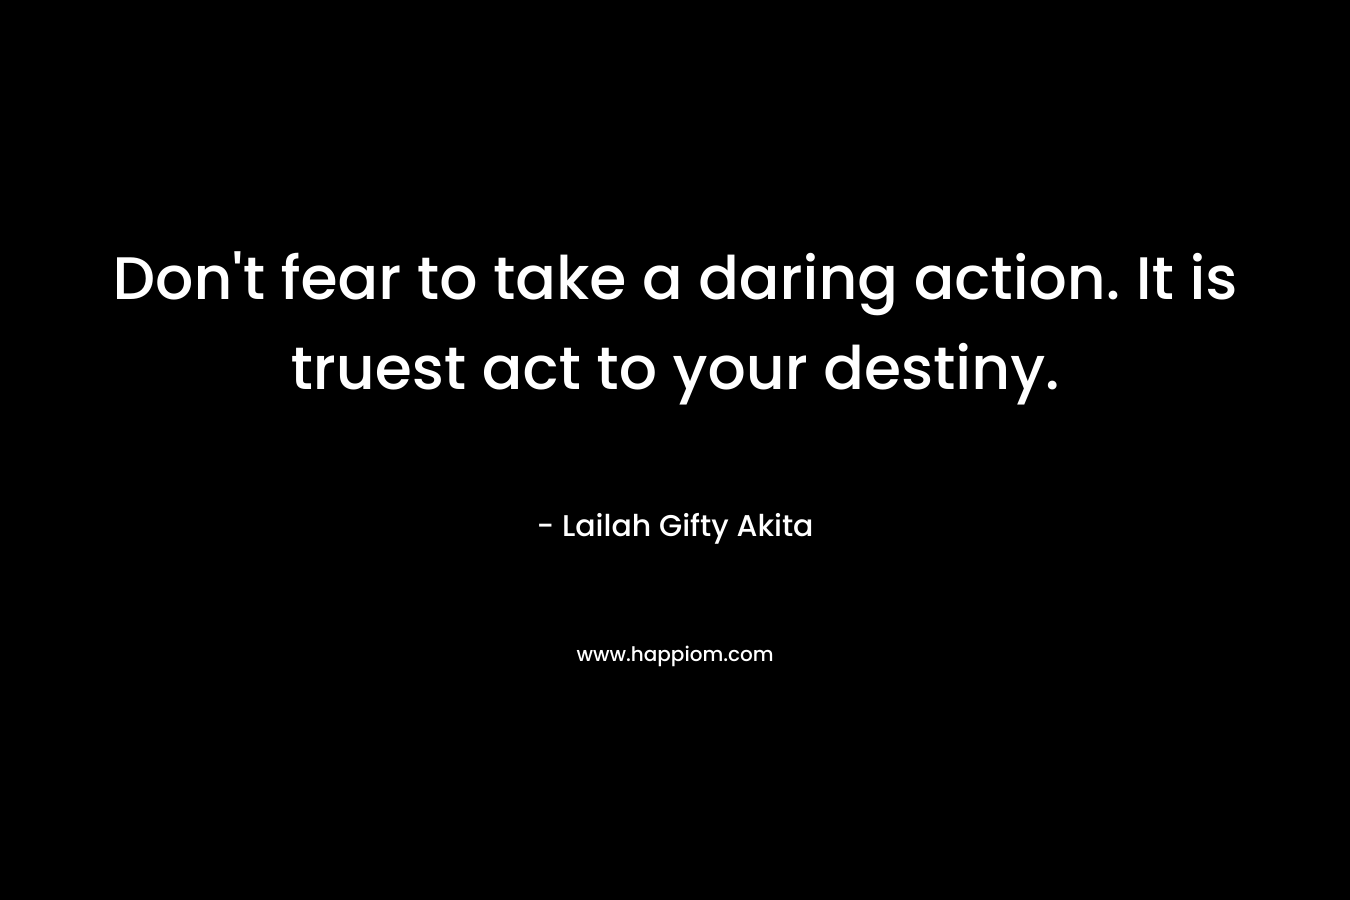 Don't fear to take a daring action. It is truest act to your destiny.